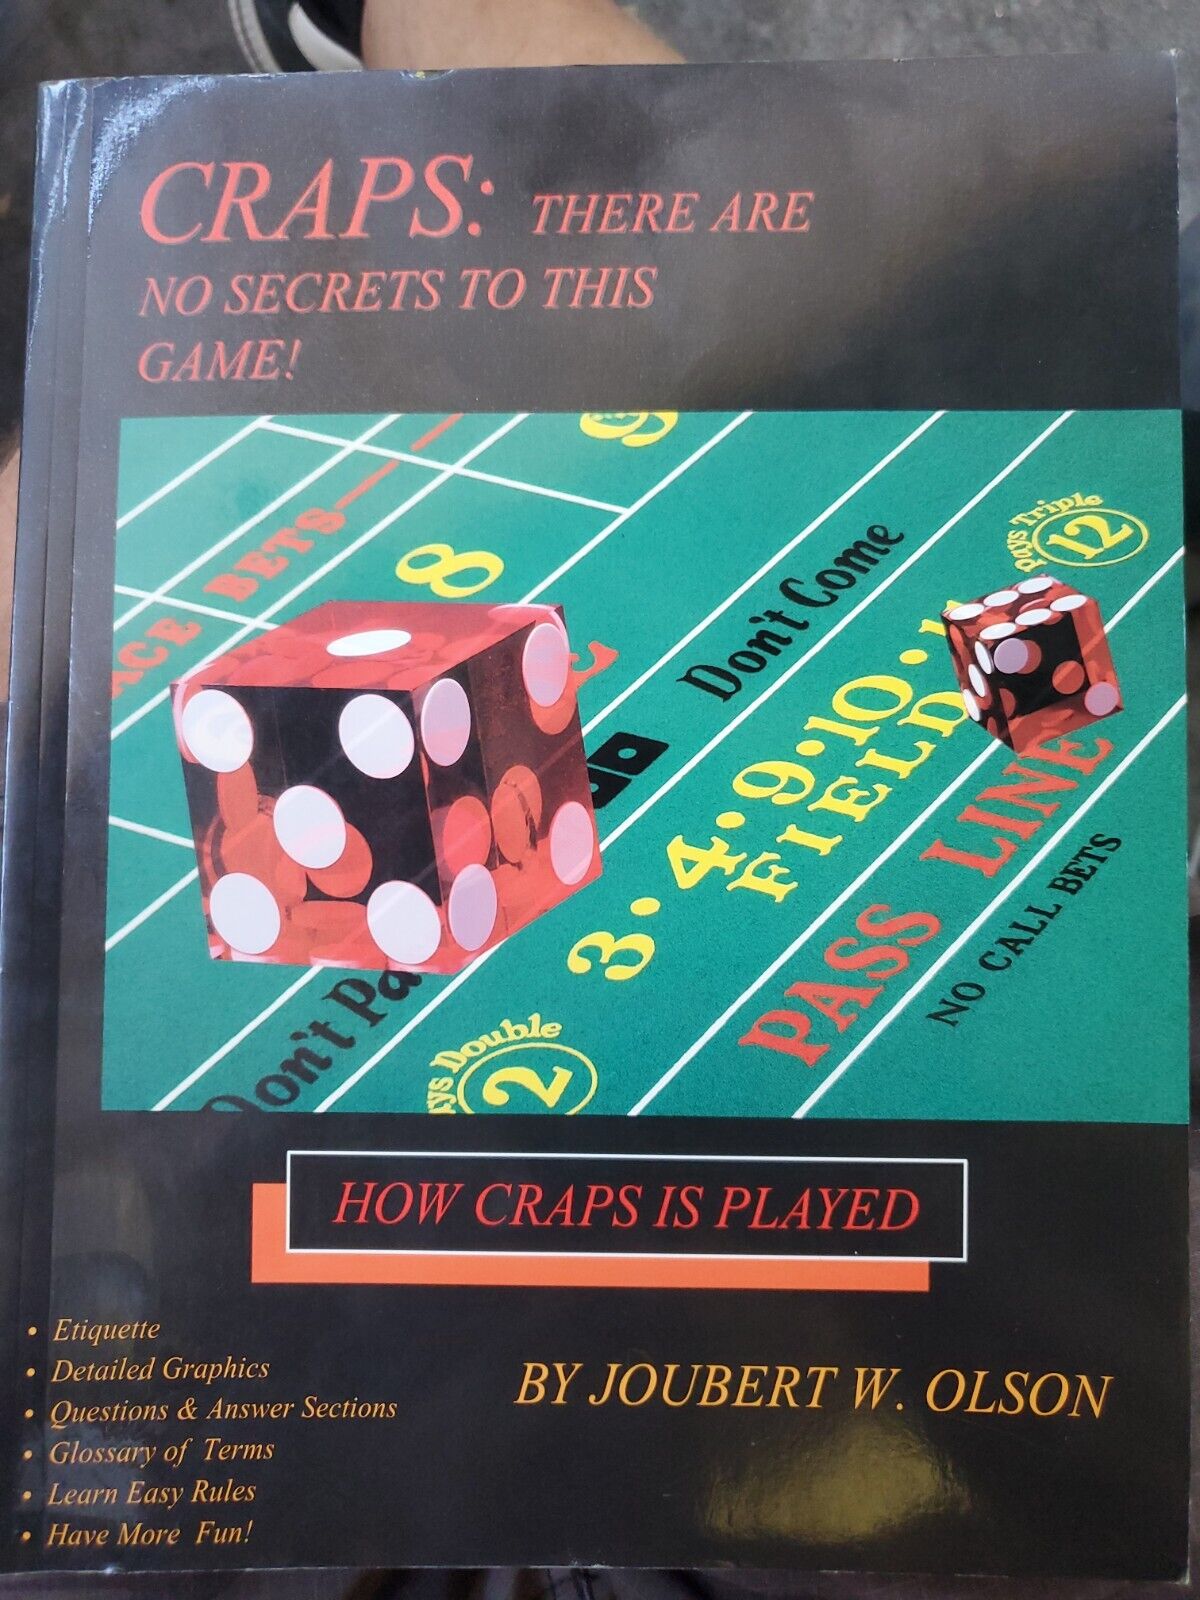 Image for "Craps: there are no secrets to this game!"